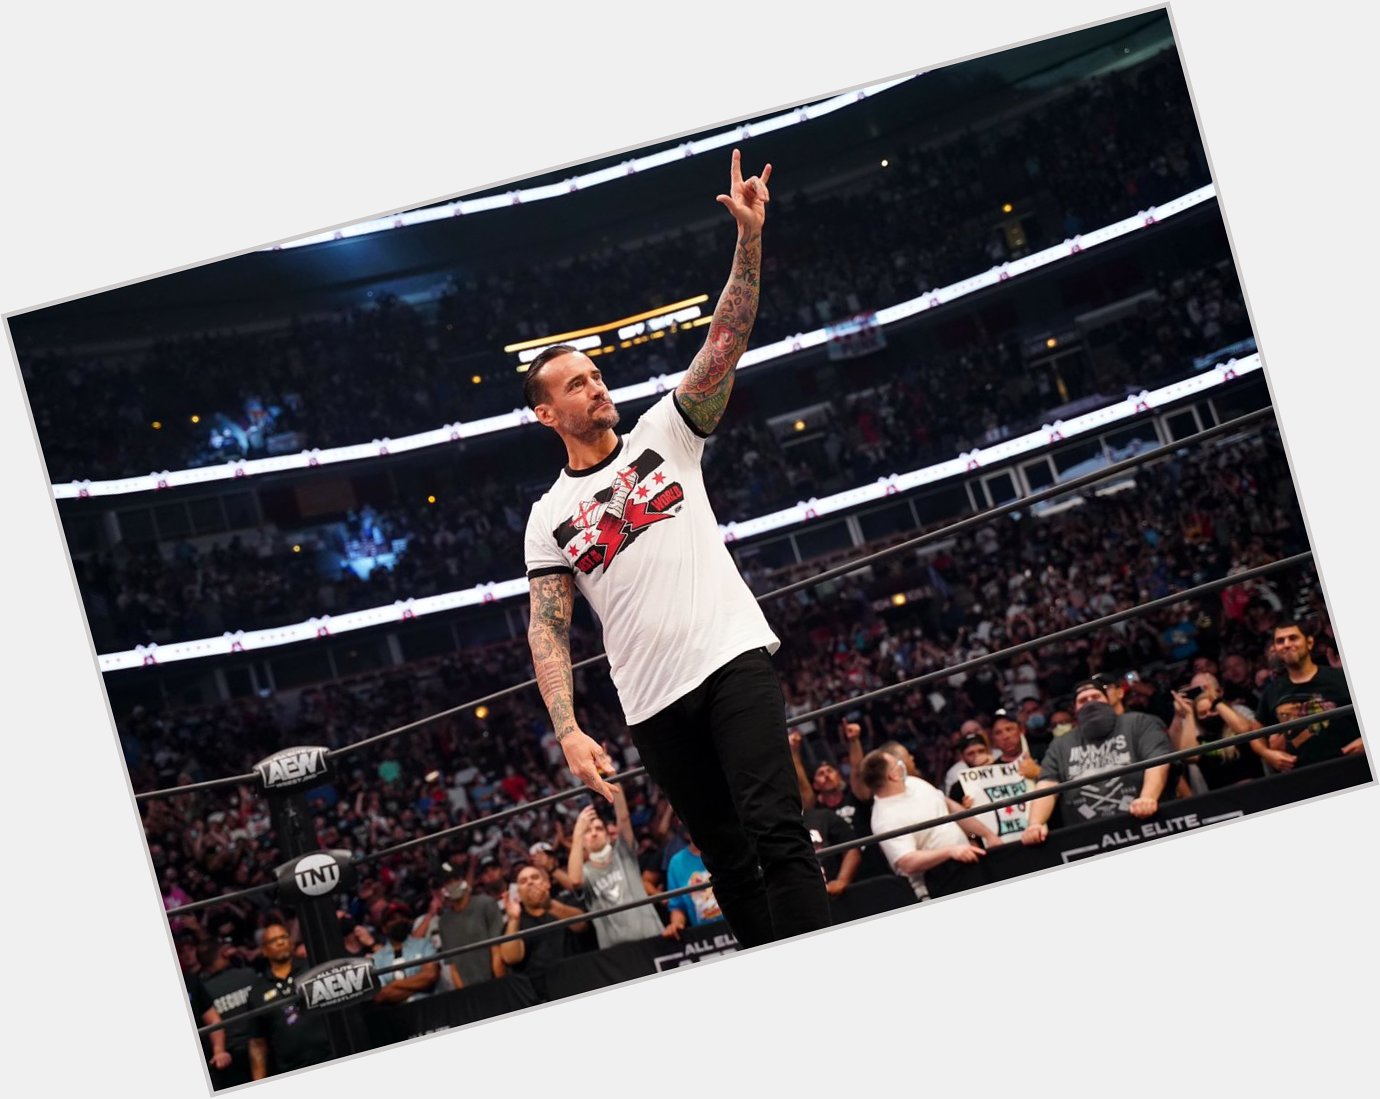   Happy Birthday to the Best in the World one of my all time Favorite Wrestlers CM Punk    